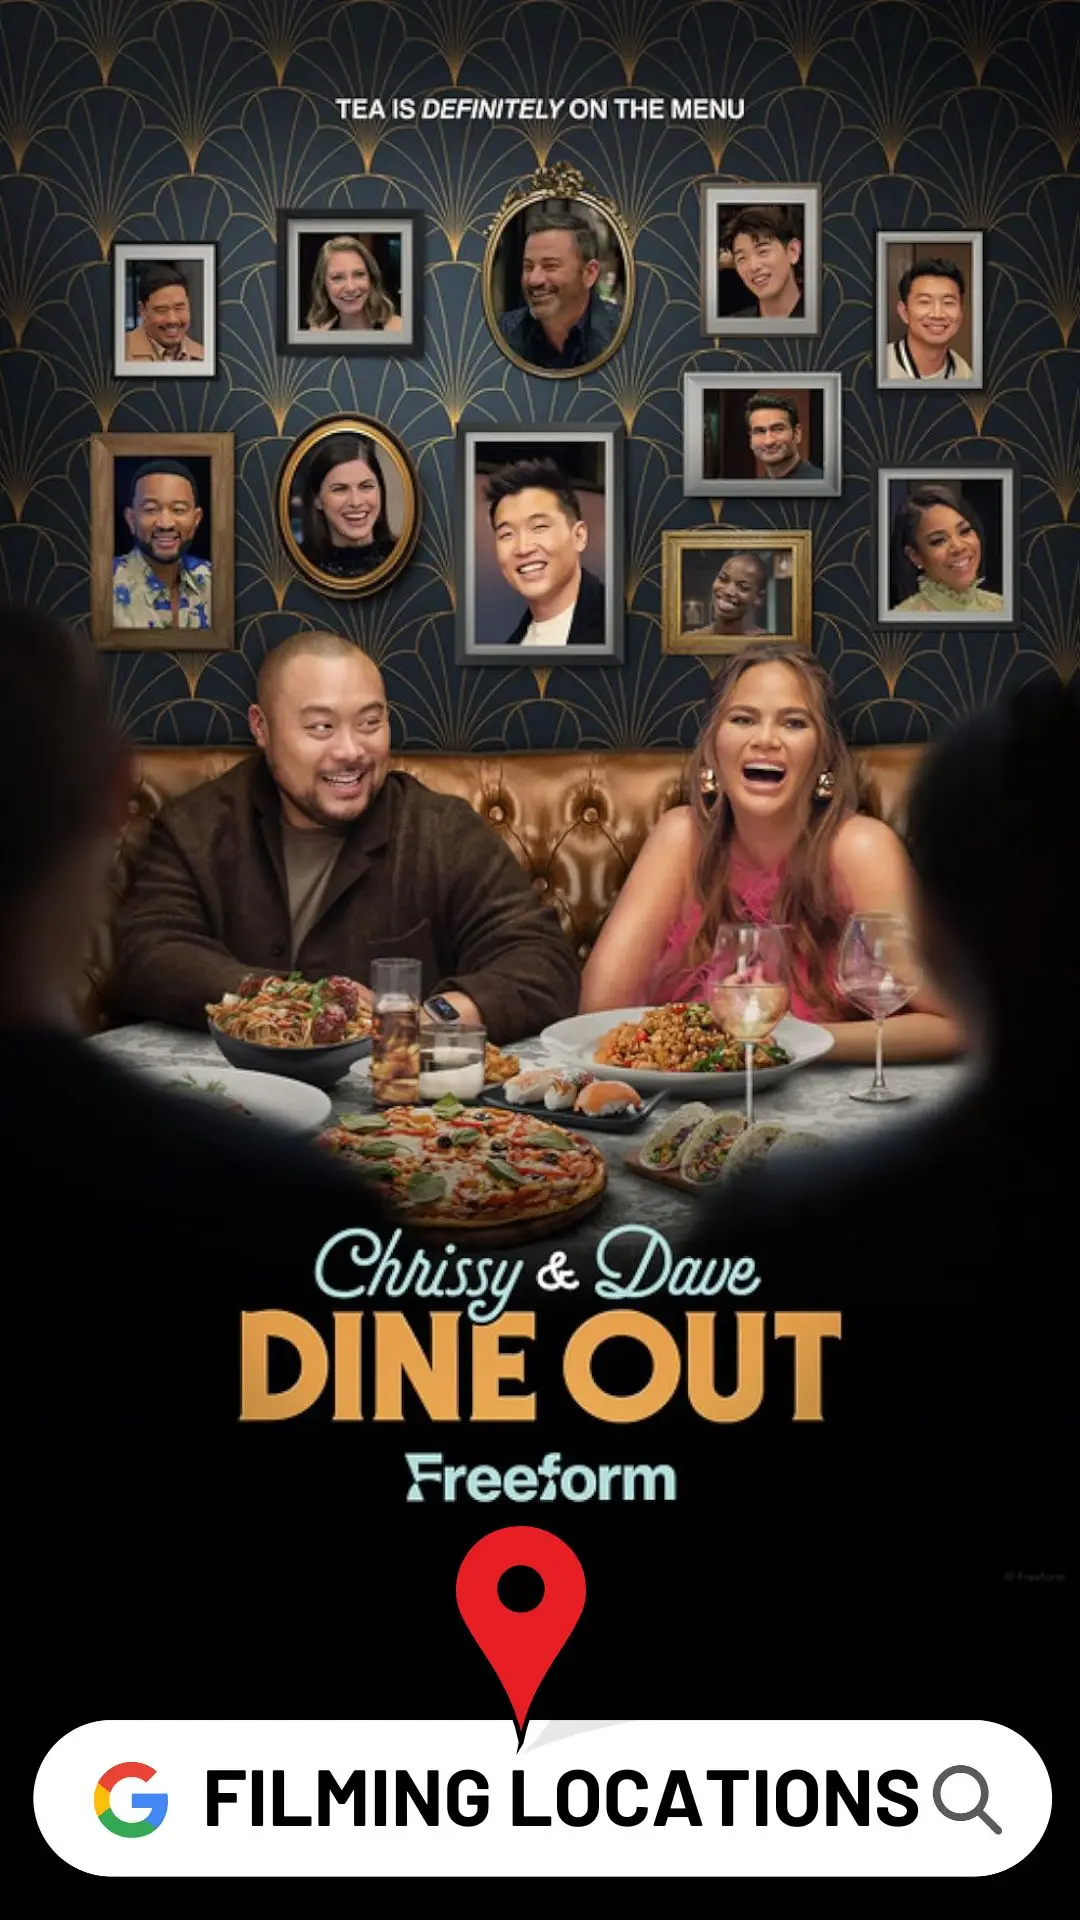 Chrissy and Dave Dine Out Filming Locations